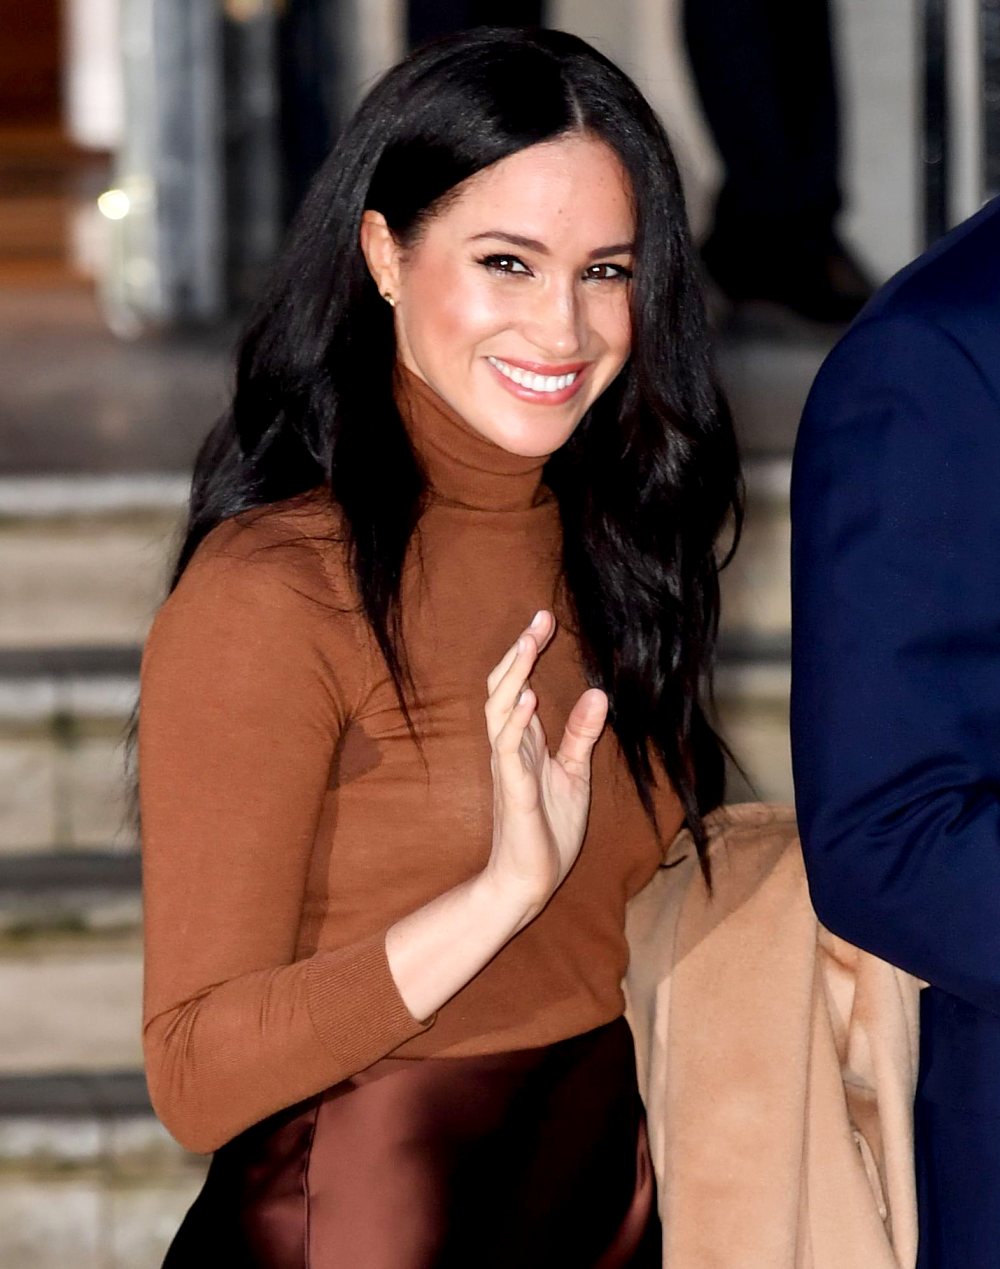 Meghan-Markle-Drives-Herself-to-Canadian-Airport-to-Pick-Up-Friend